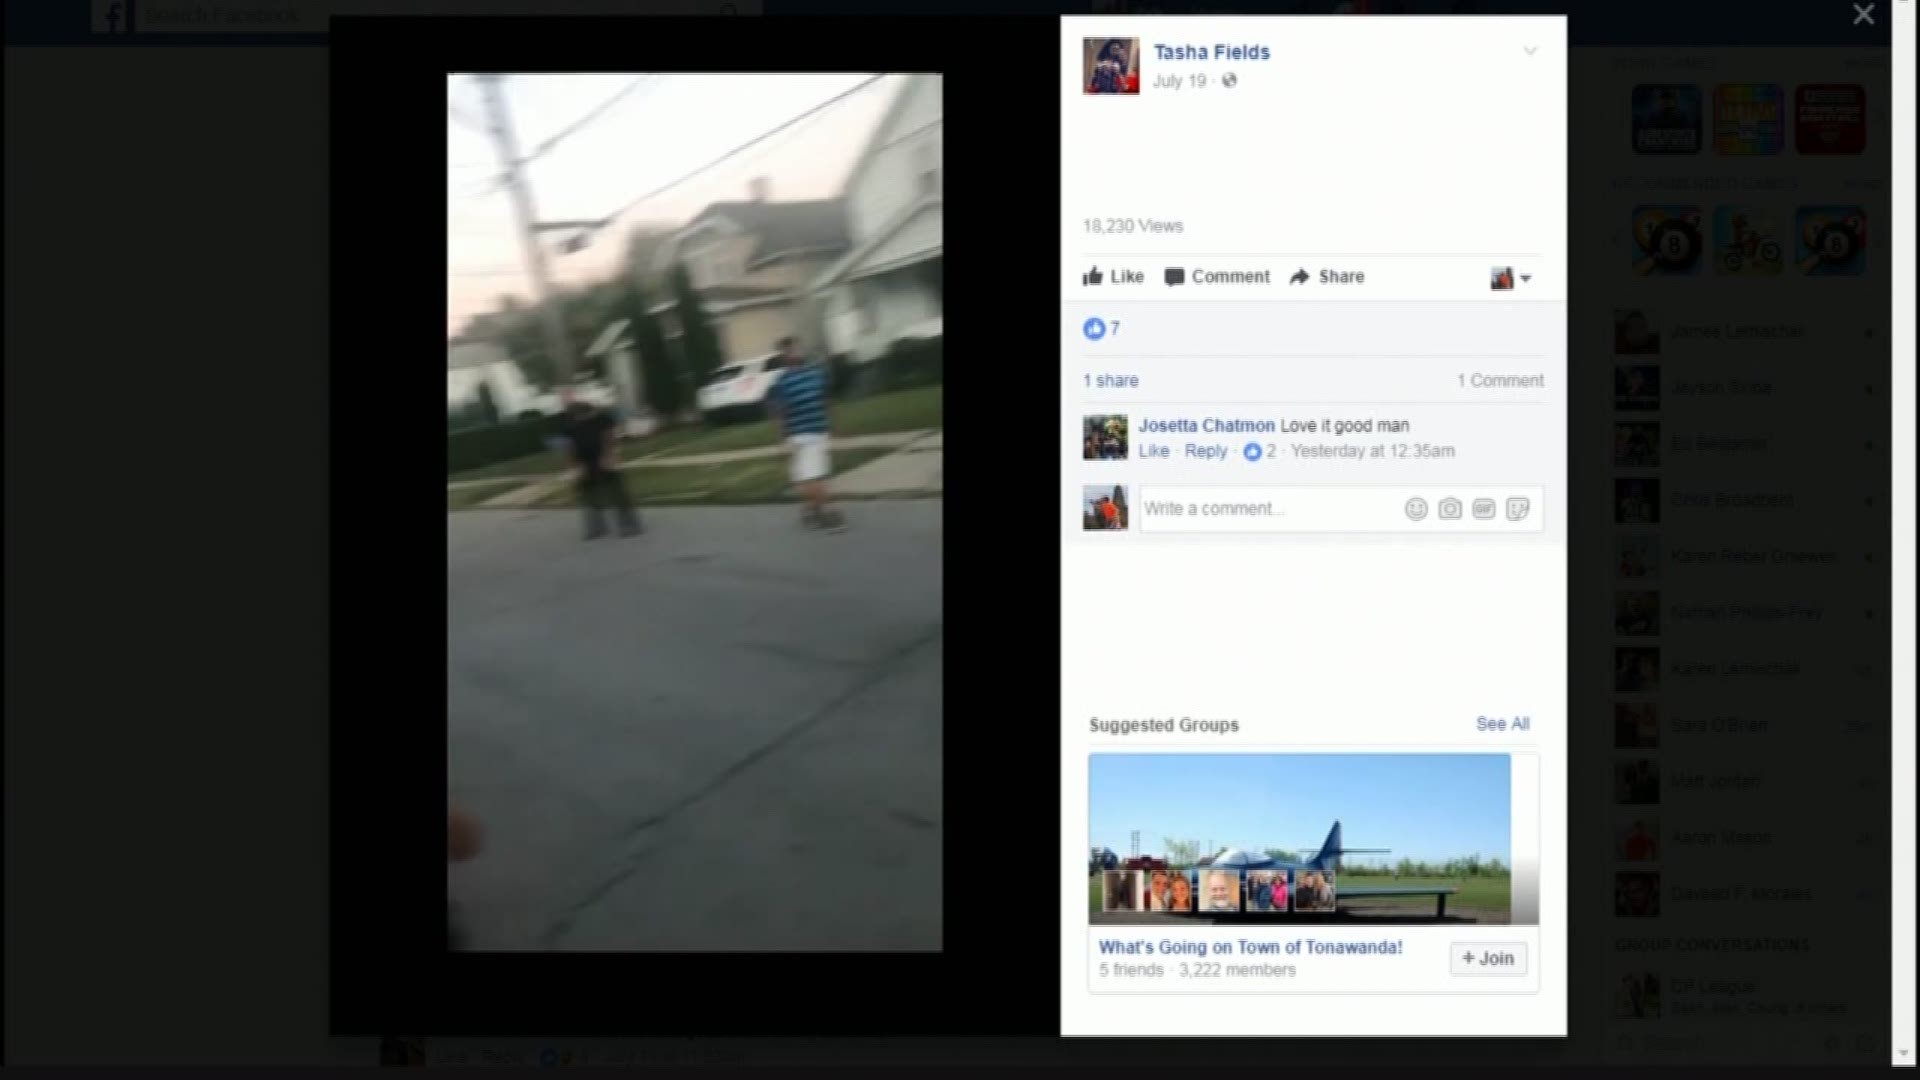 This video showing a Buffalo police officer playing a pickup game of football in the street is going viral.